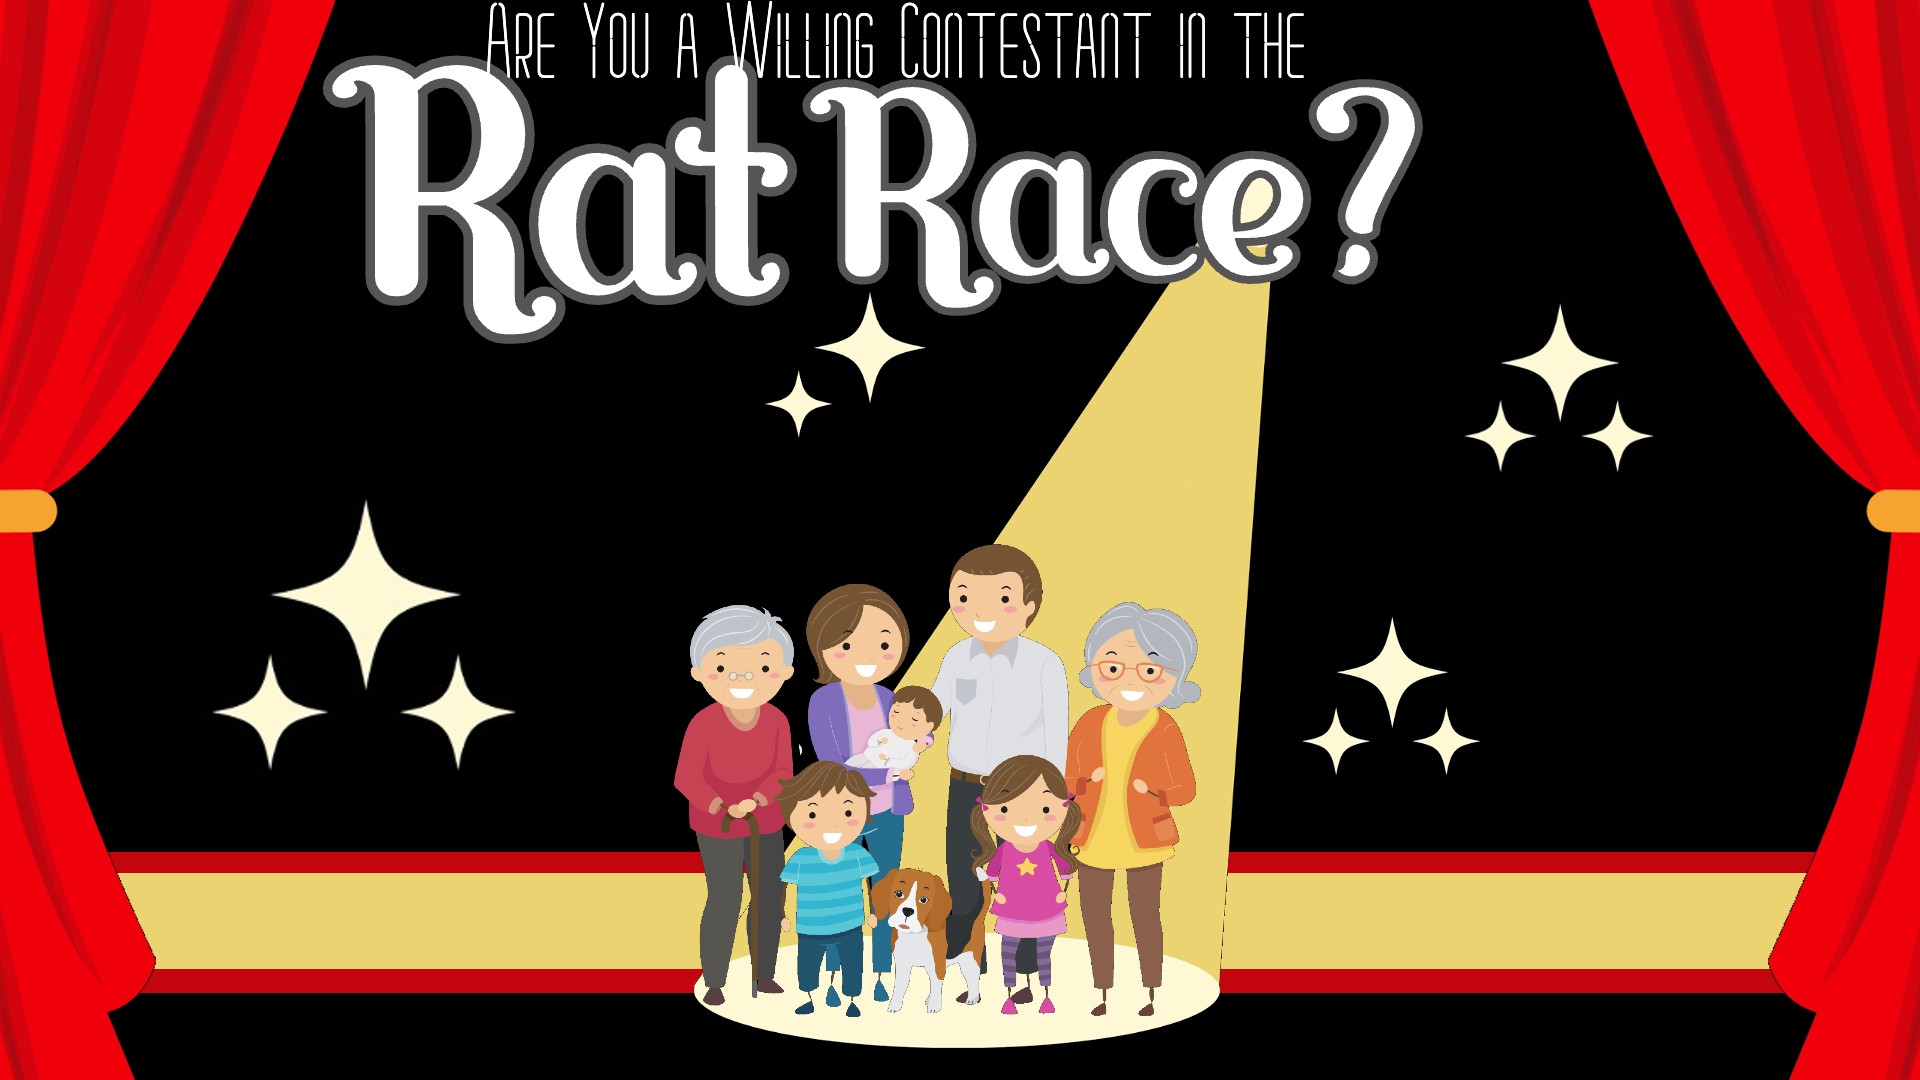 Are You a Willing Contestant in the Rat Race?